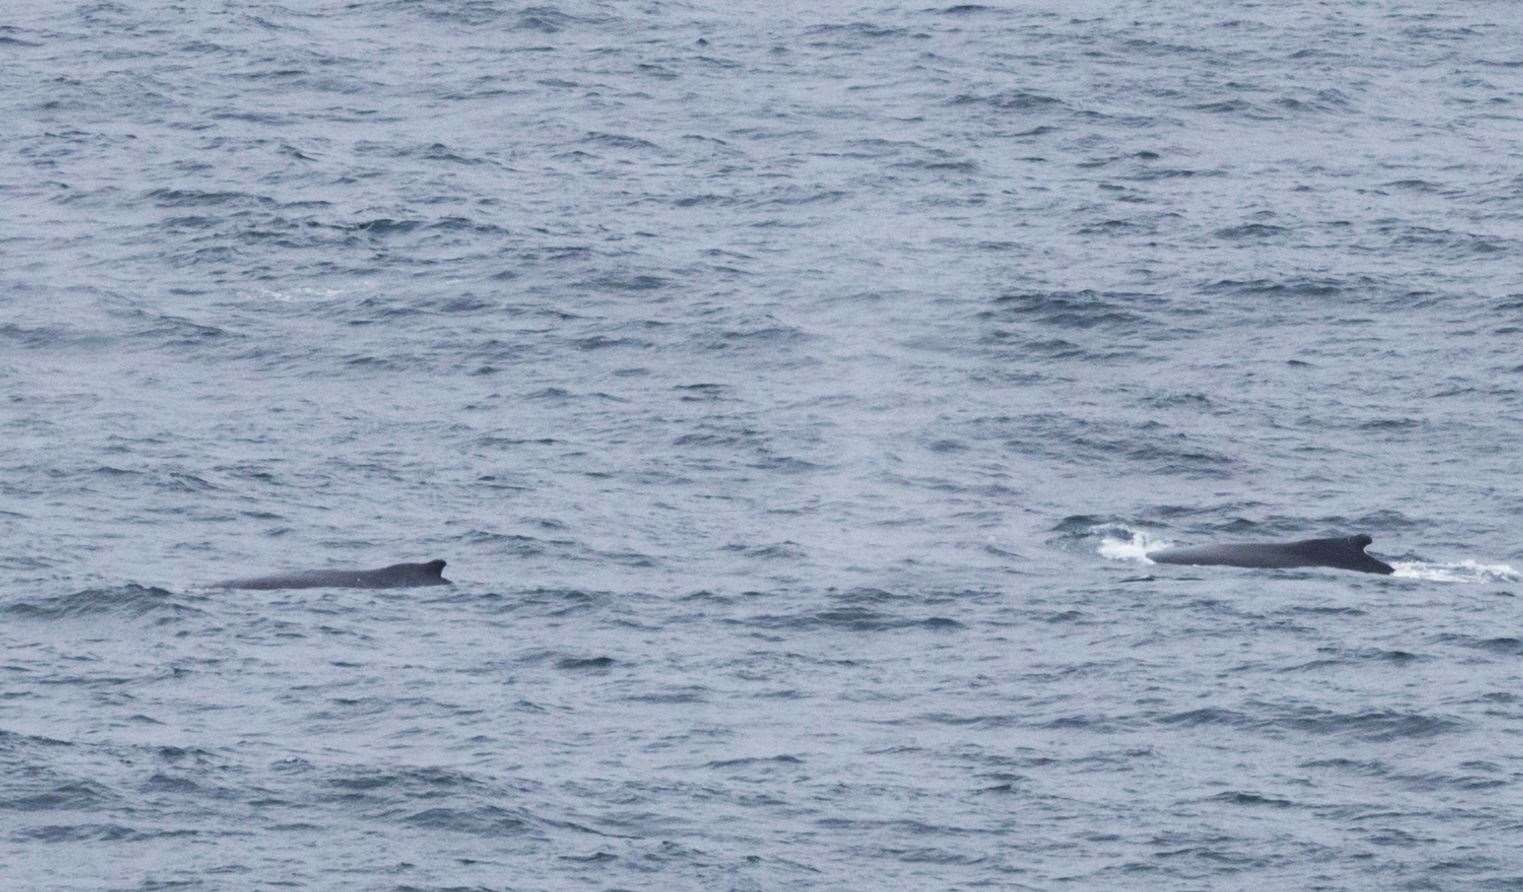 Two of the humpback whales photographed from Dunnet Head on Friday. Picture: Karen Munro